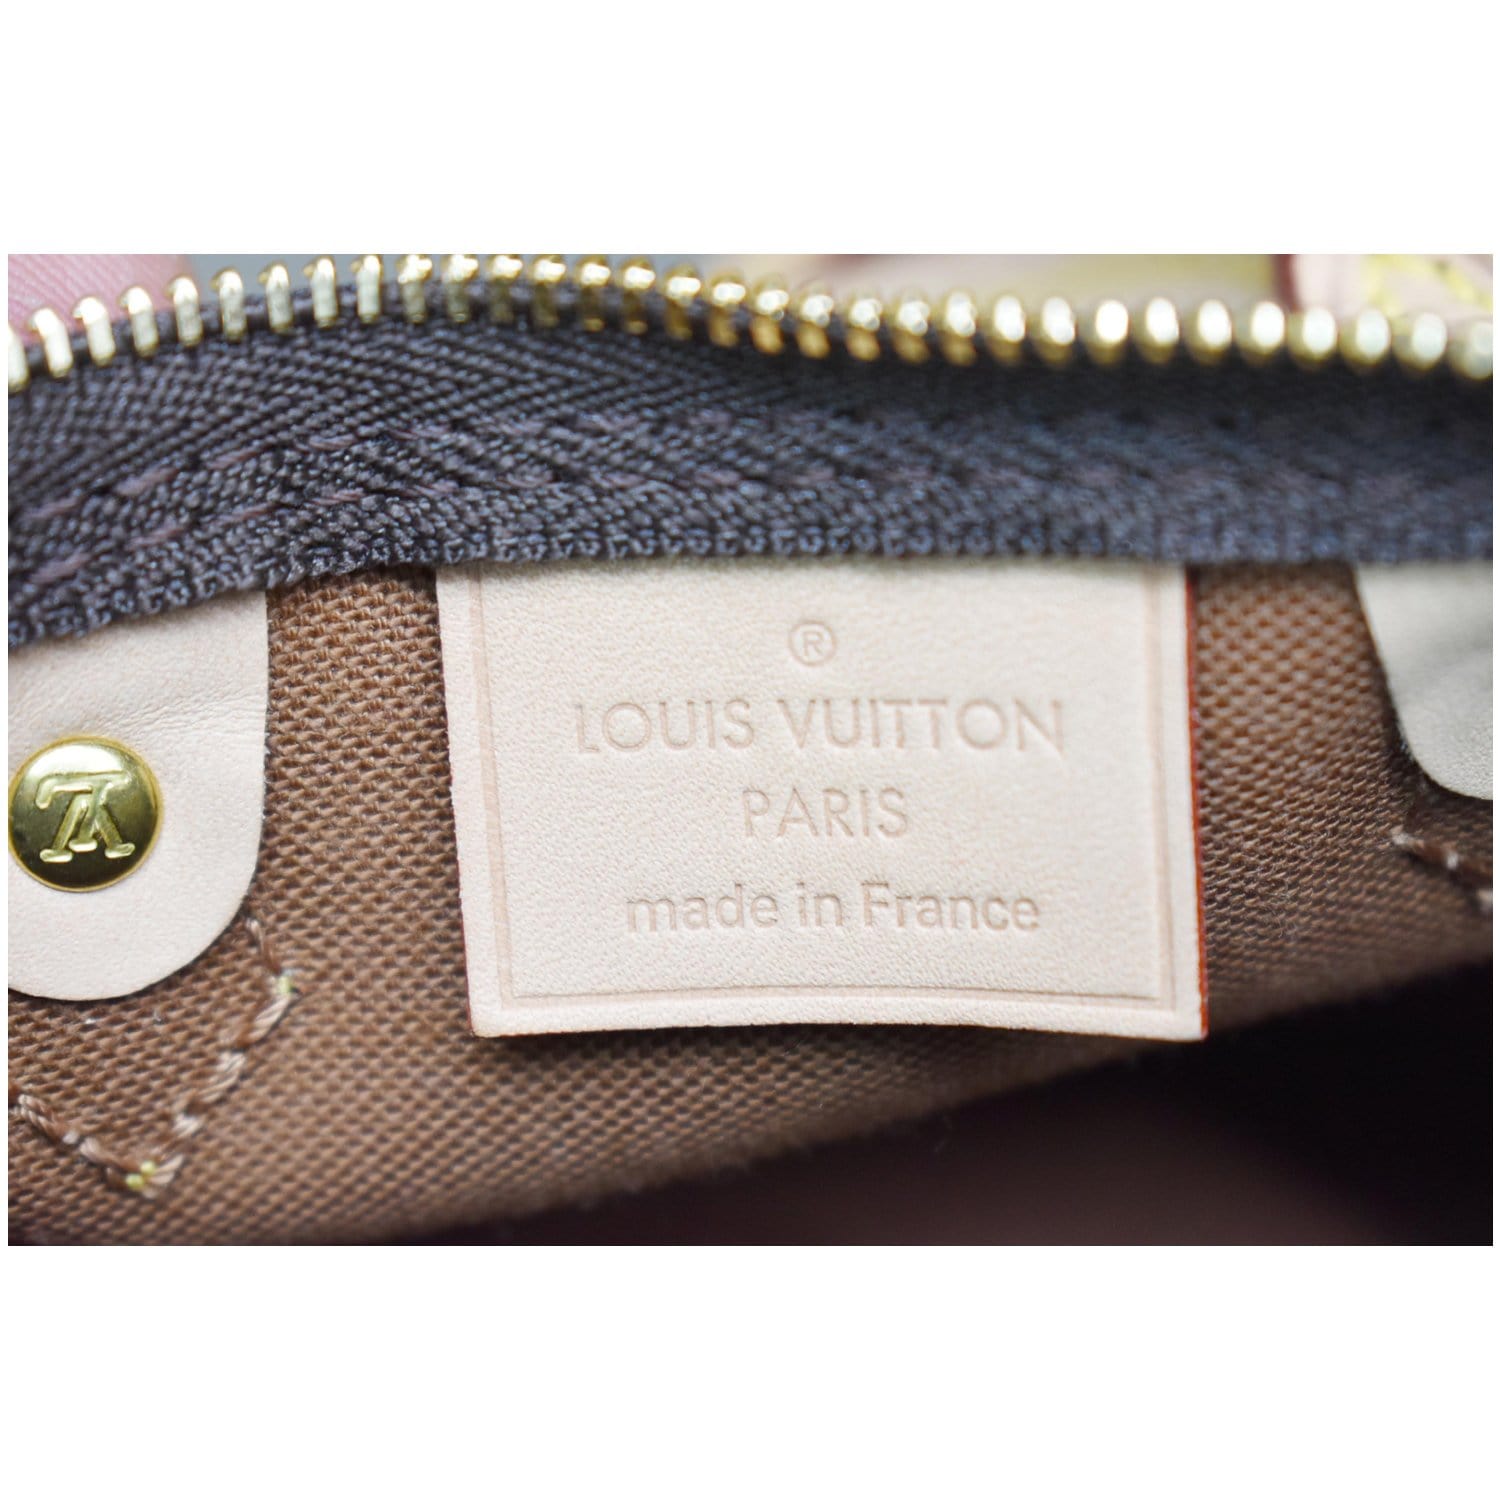 HOW I RUNIED MY NANO SPEEDY & HOW I FIXED IT  HOW TO GET COLOUR TRANSFER  OFF LOUIS VUITTON CANVAS 